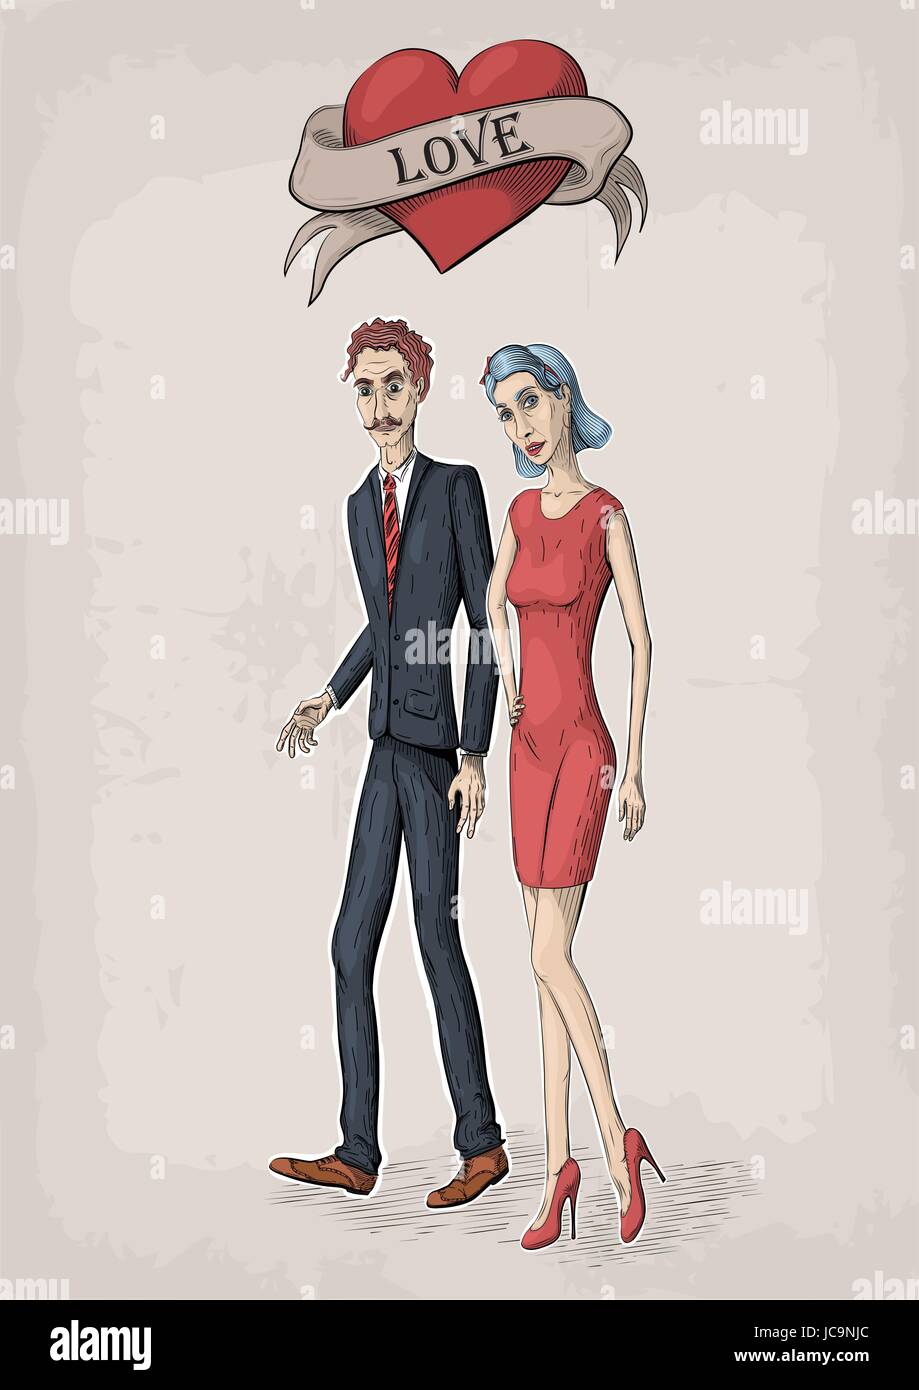 Vector vintage valentine color illustration of couple in love young men with beautiful woman in red dress, heart symbol, sign with inscription love. Stock Vector